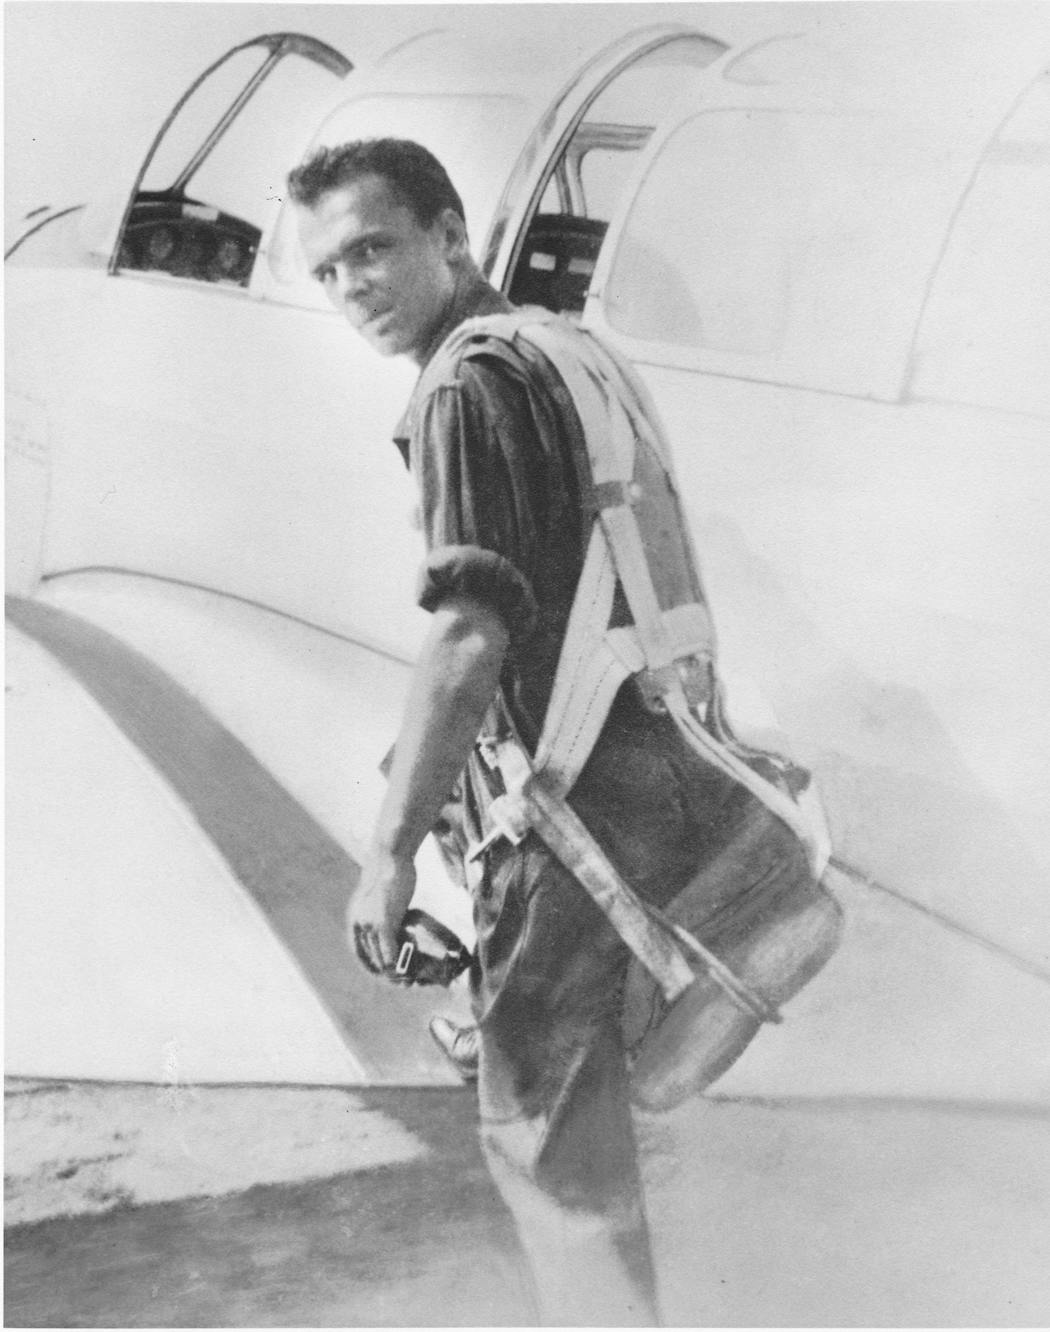 Lt. William J. McGowan during his 1943 pilot training in Eagle Pass, Texas, right before he got his commission and wings.